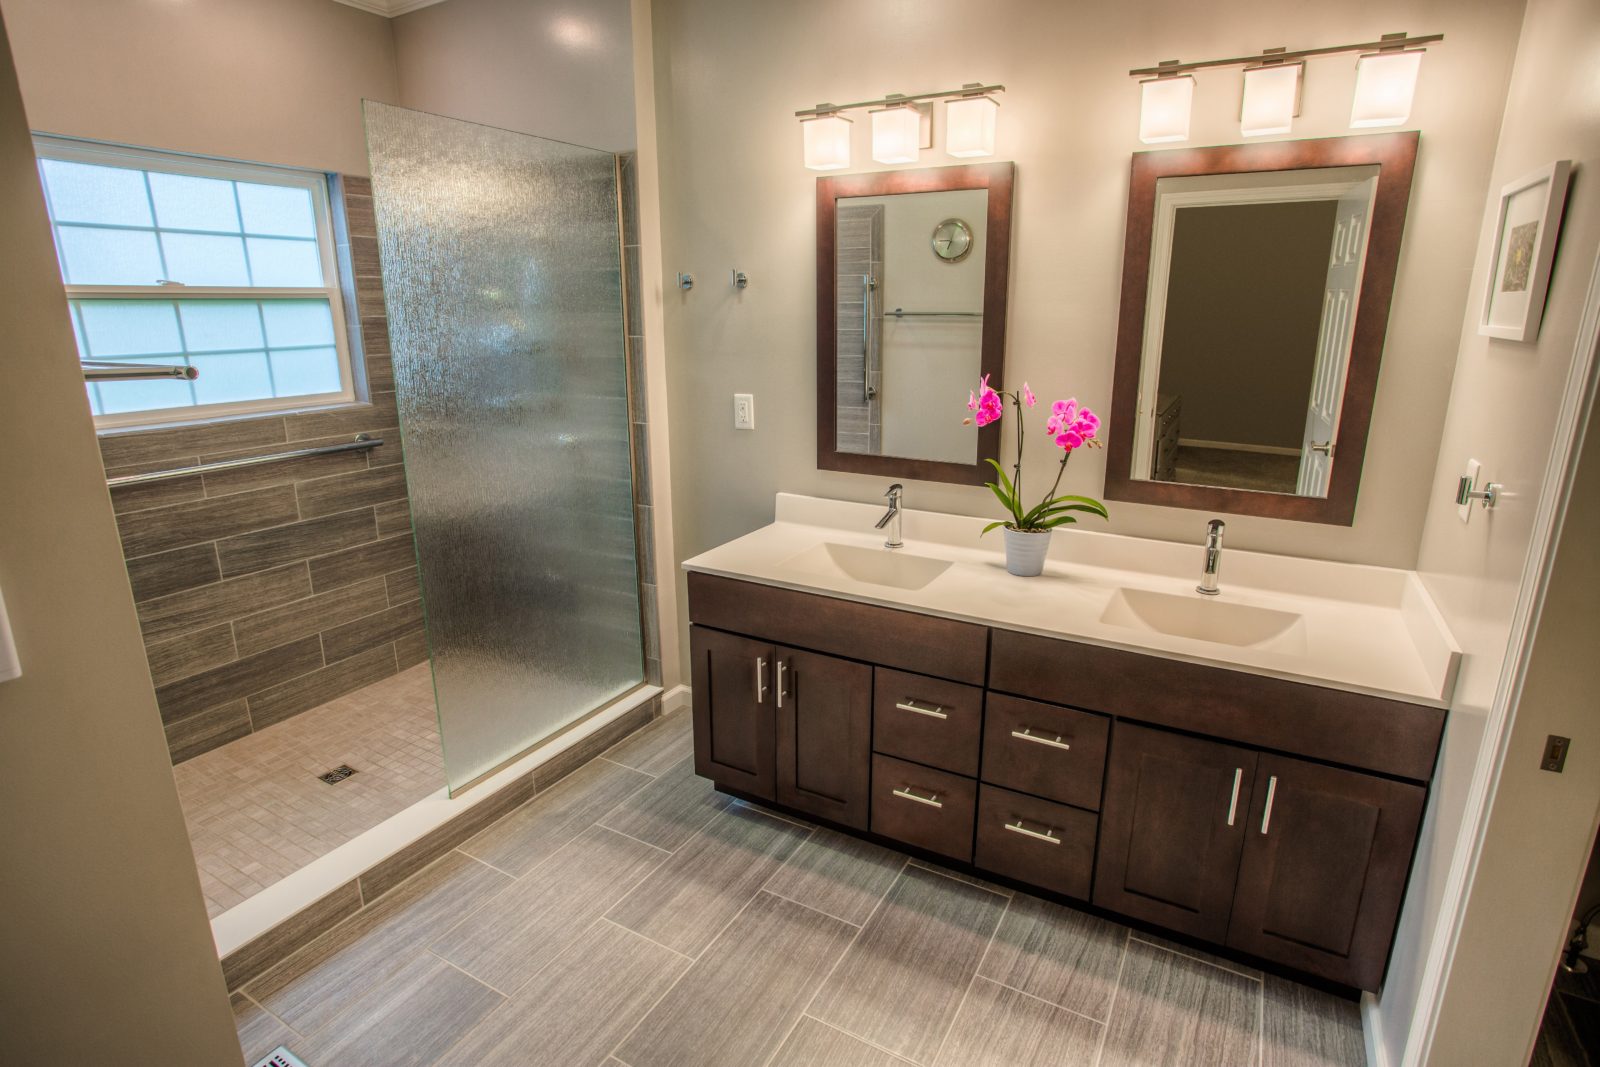 West Lafayette Contemporary Master Bathroom Remodel ...